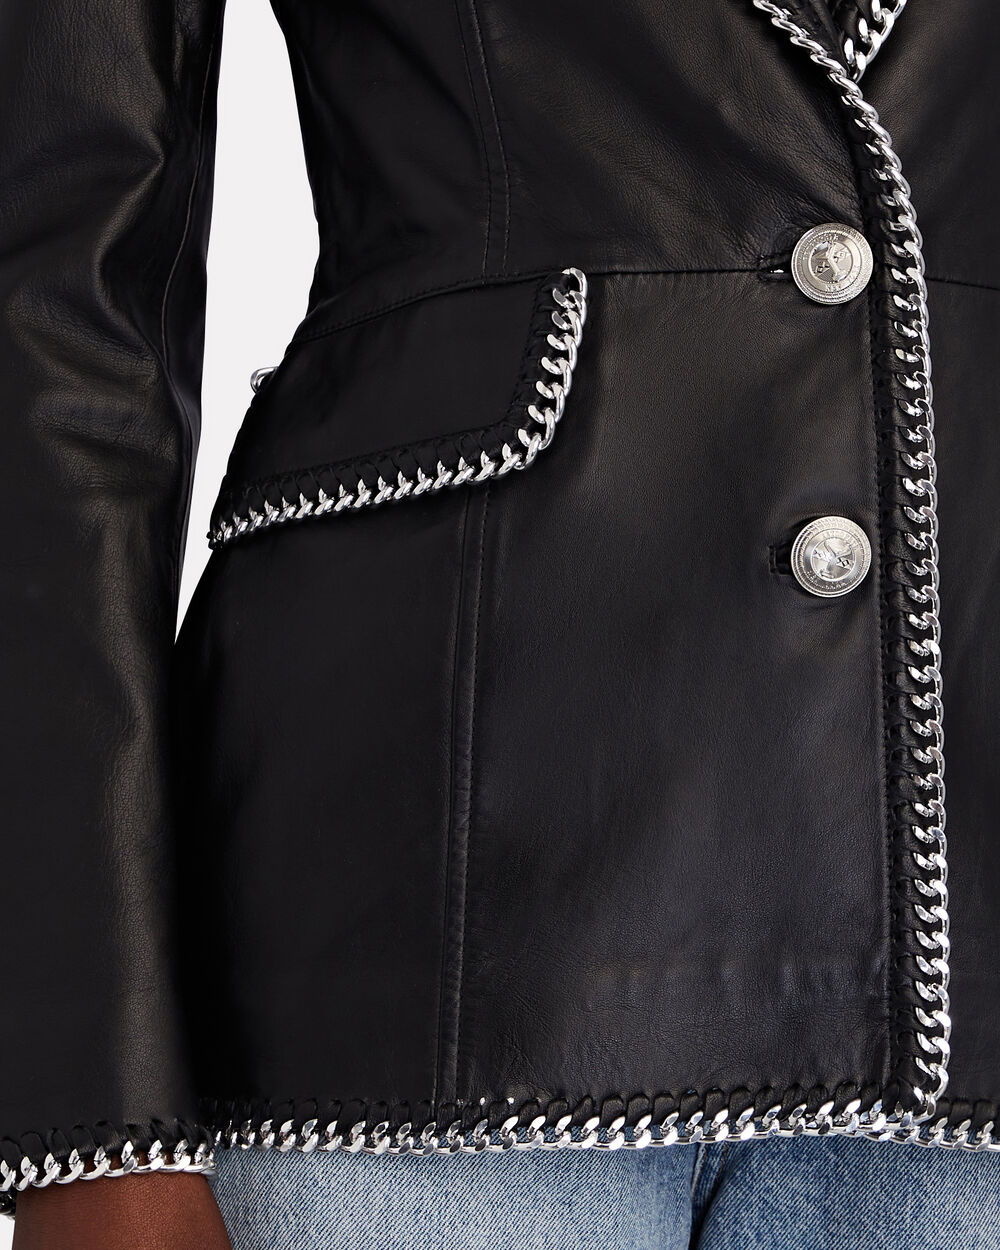 leather jacket chain